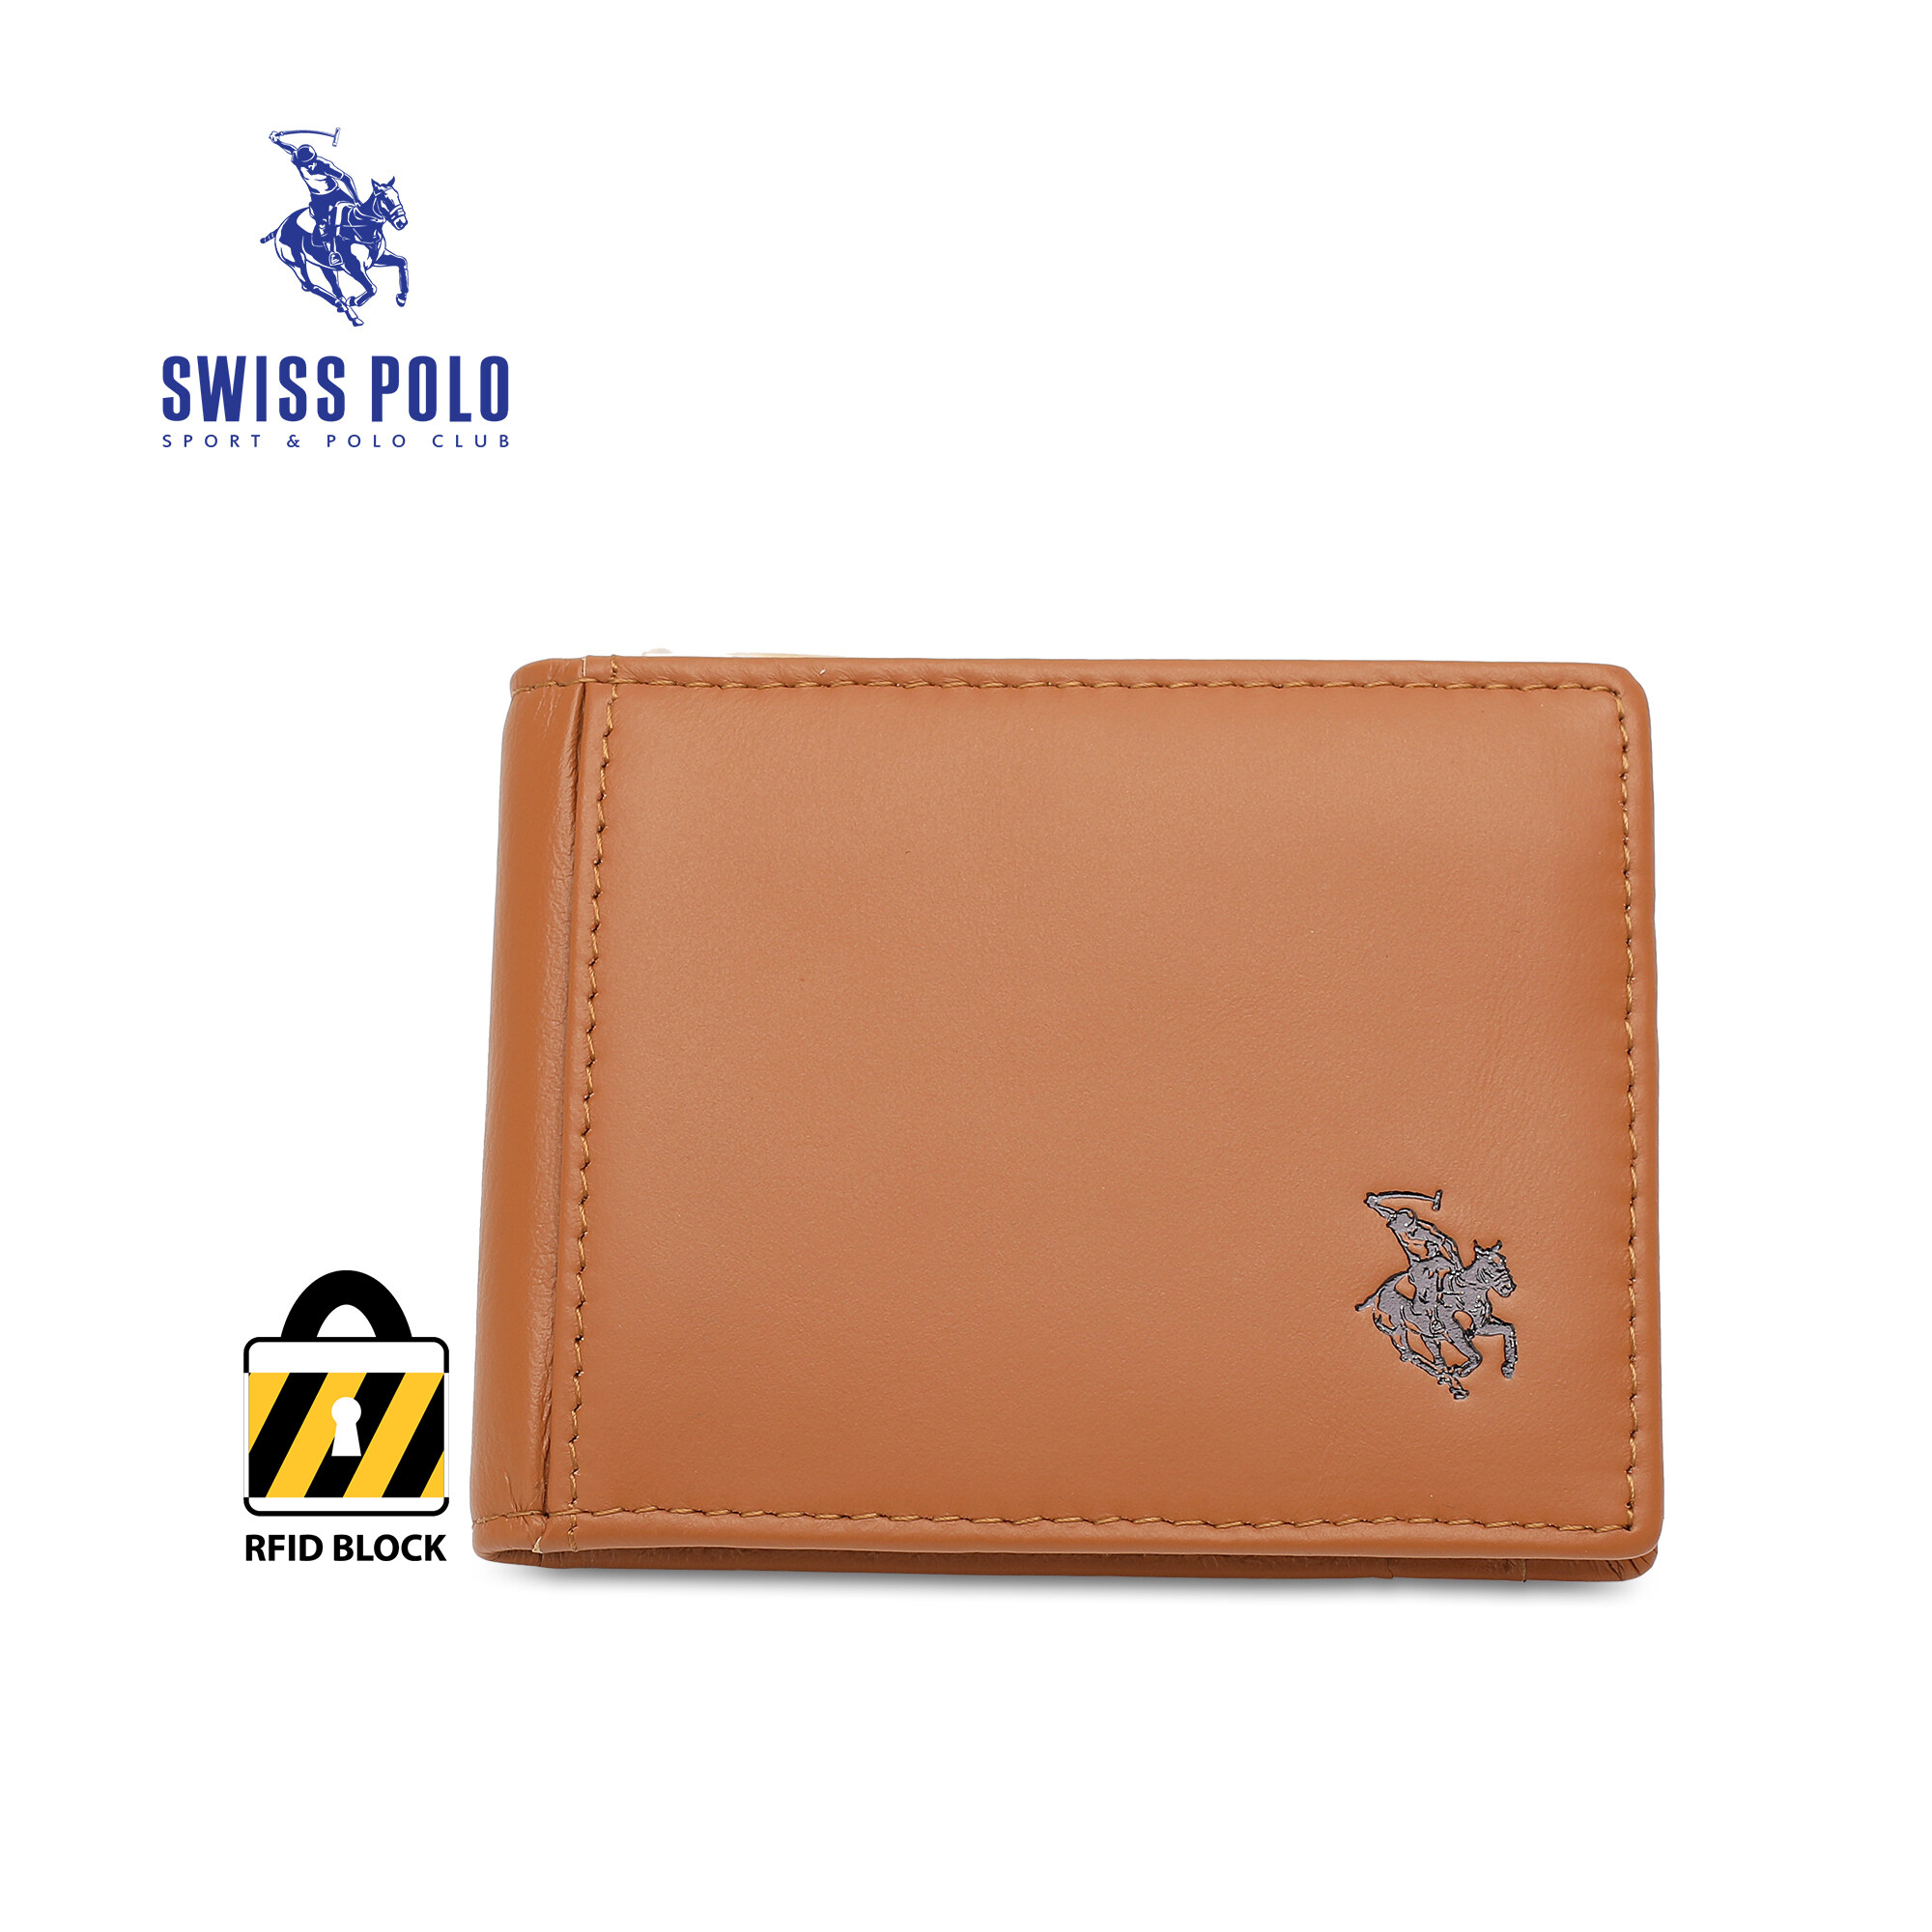 SWISS POLO Genuine Leather RFID Money Clip/Card Holder SW 162-3 BROWN